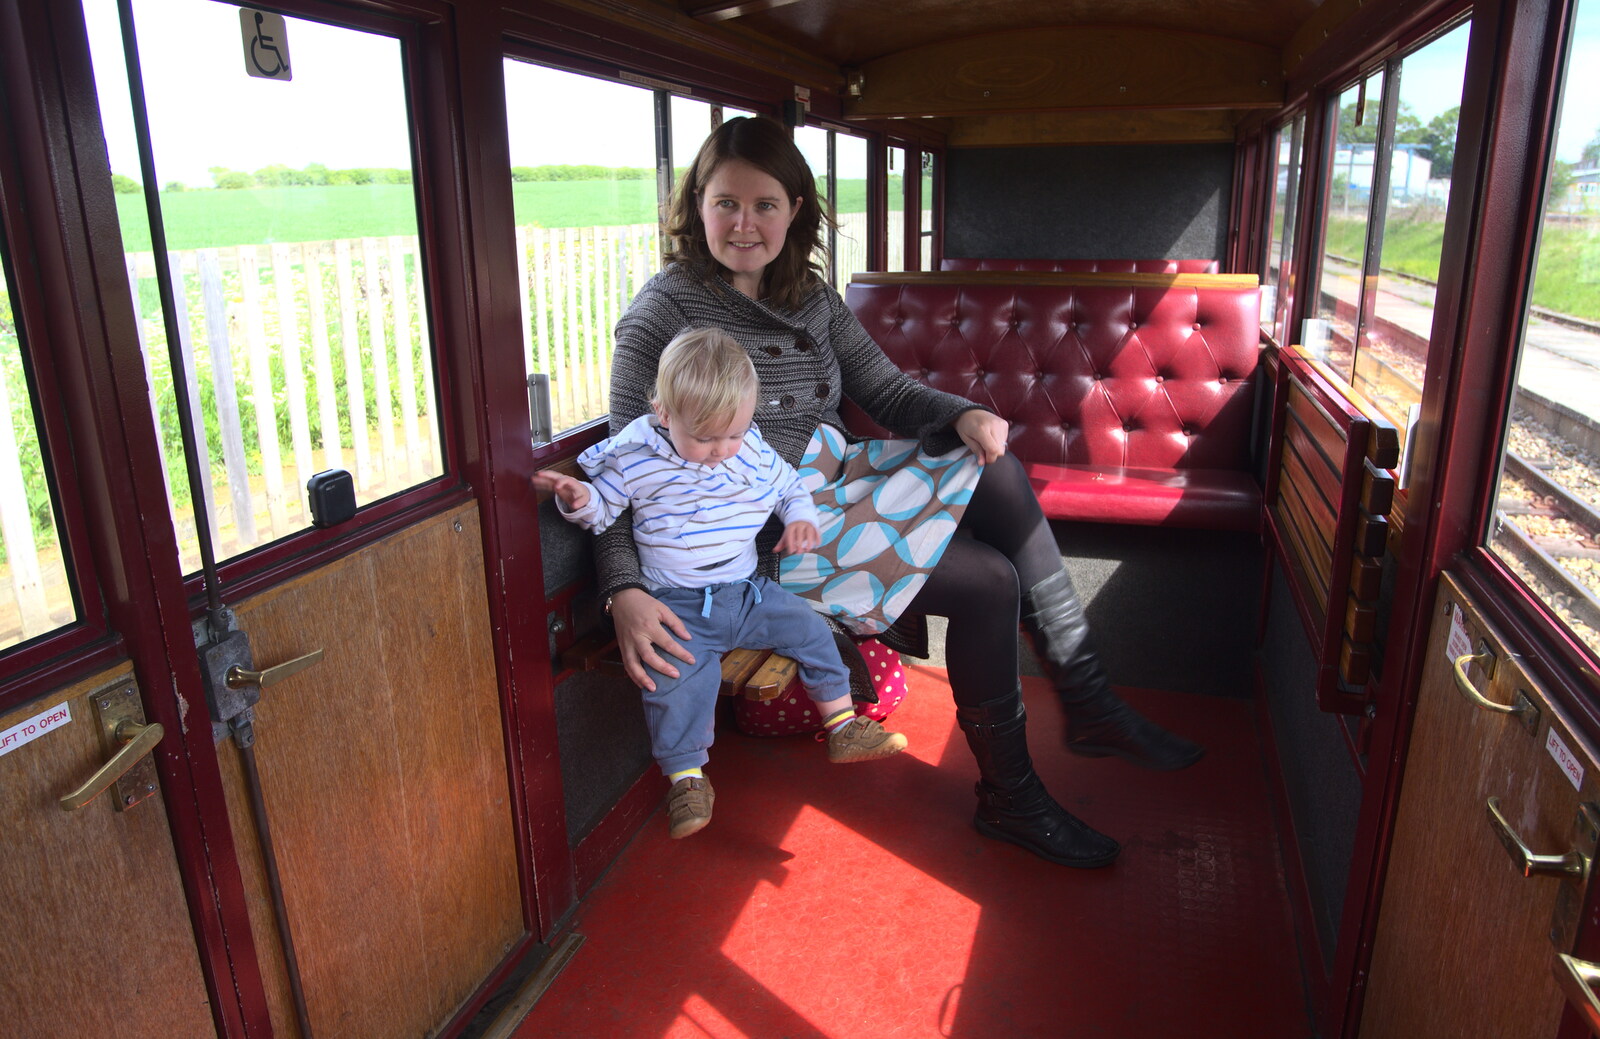 Harry and Isobel in the carriage from The Bure Valley Railway, Aylsham, Norfolk - 26th May 2013